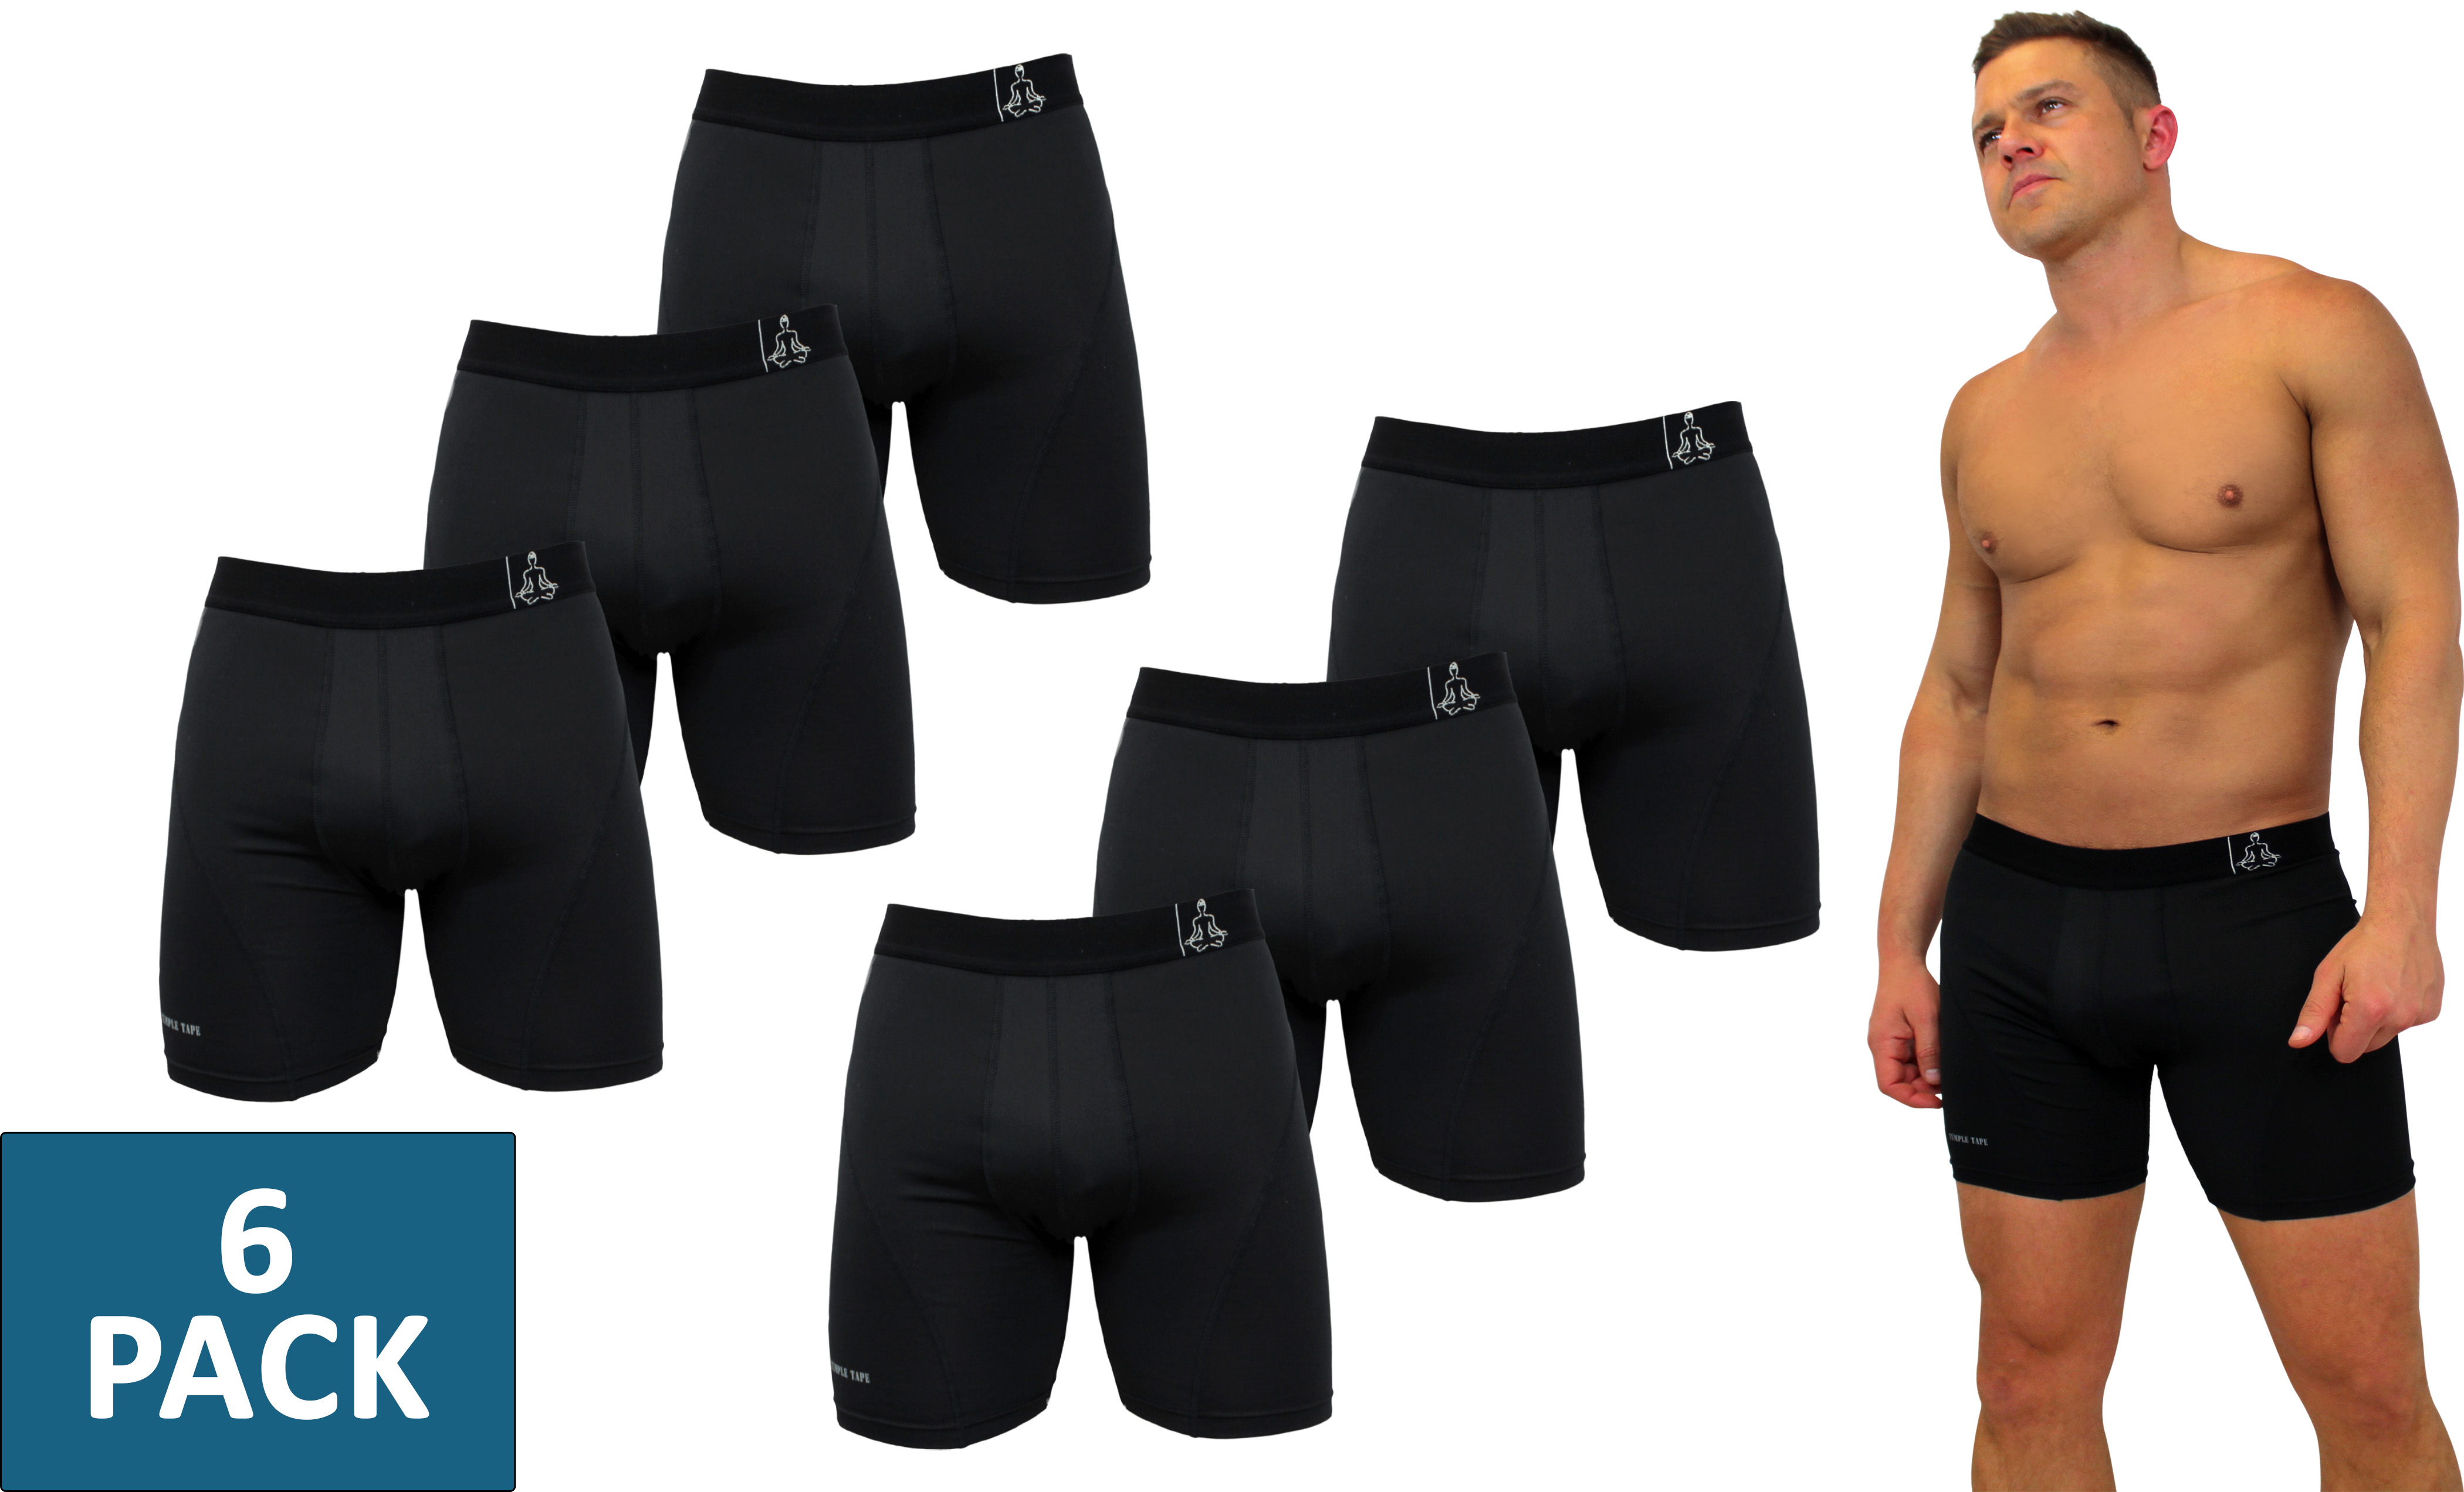 Temple Tape Compression Mens Underwear - Sports Performance Boxer Briefs 6-Pack - image 1 of 3